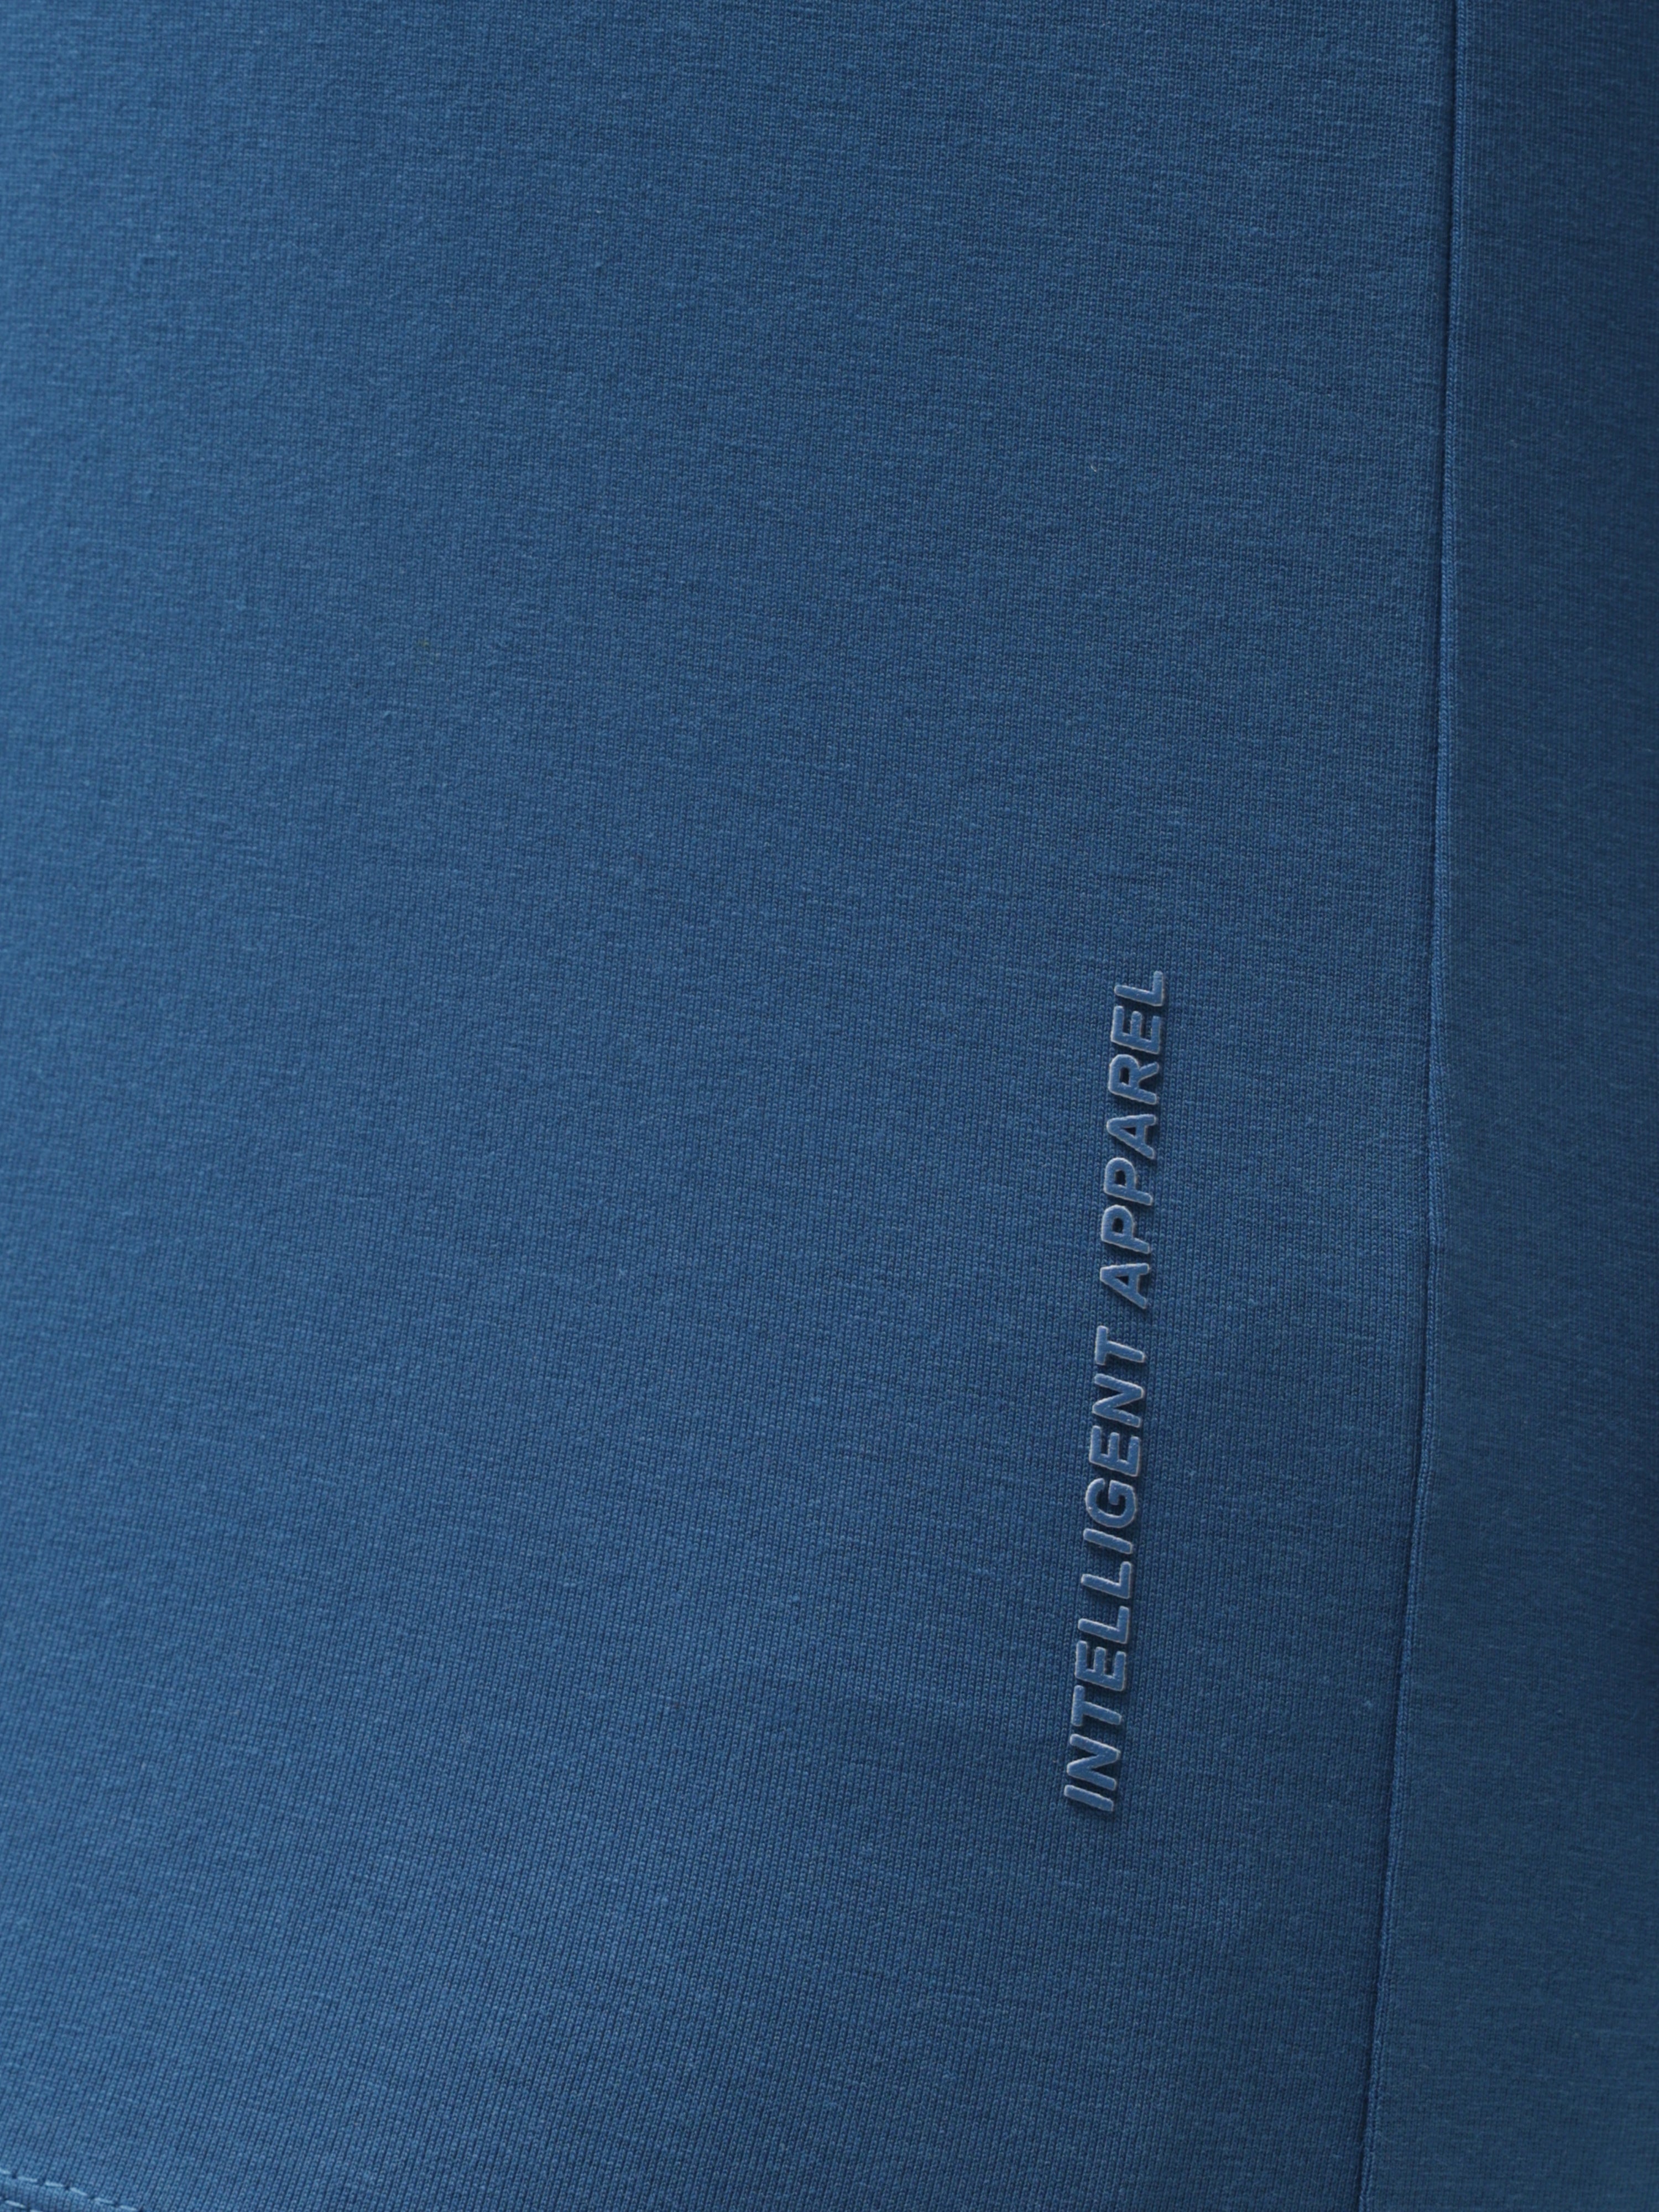 Close-up of Sea Blue Turms T-shirt fabric showcasing "Intelligent Apparel" text, highlighting its anti-stain, anti-odour, and stretchable properties